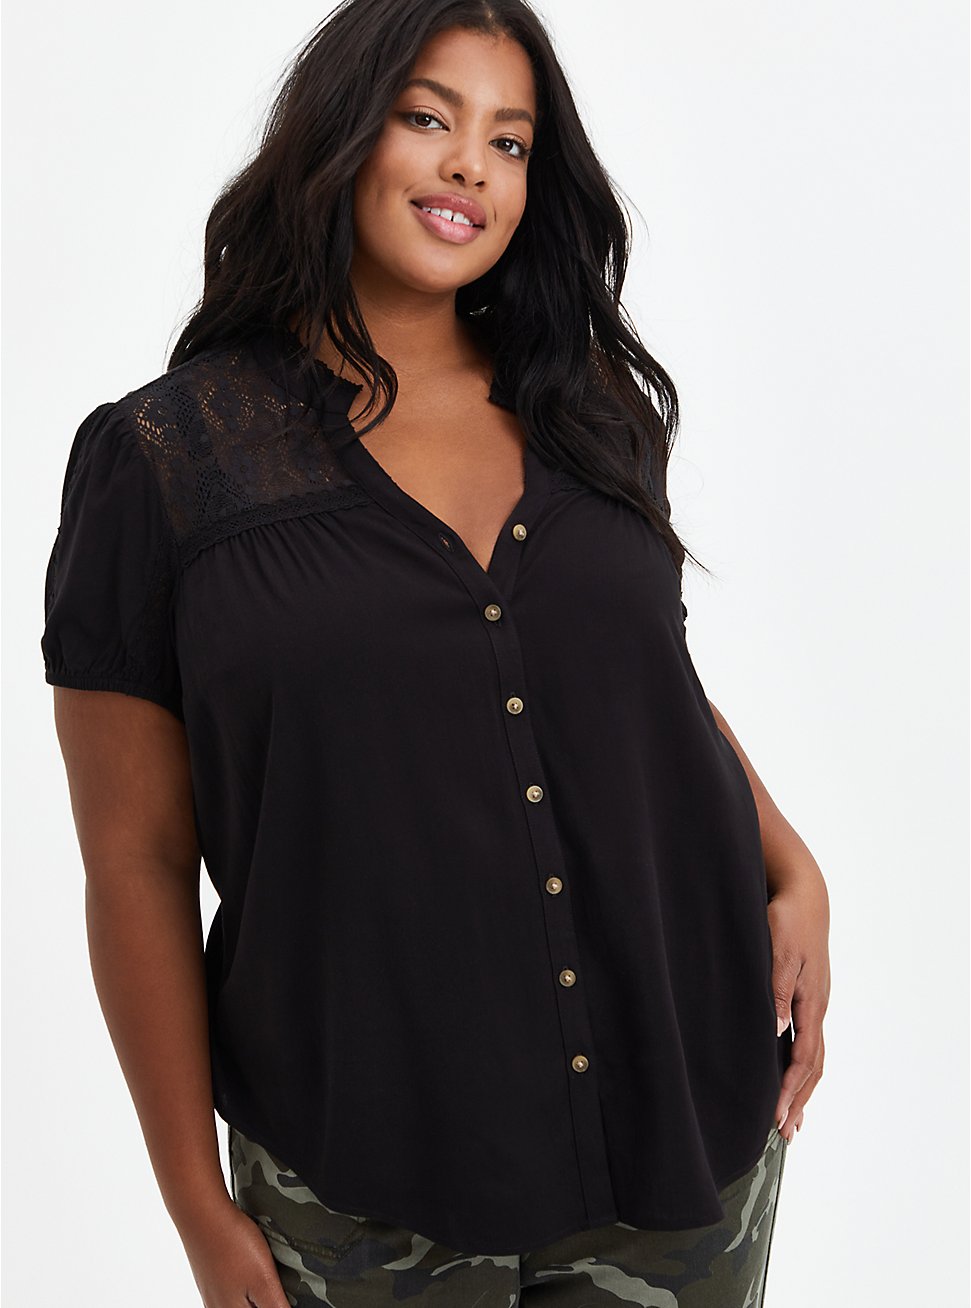 Lace Inset Blouse - Textured Stretch Rayon Black, DEEP BLACK, hi-res